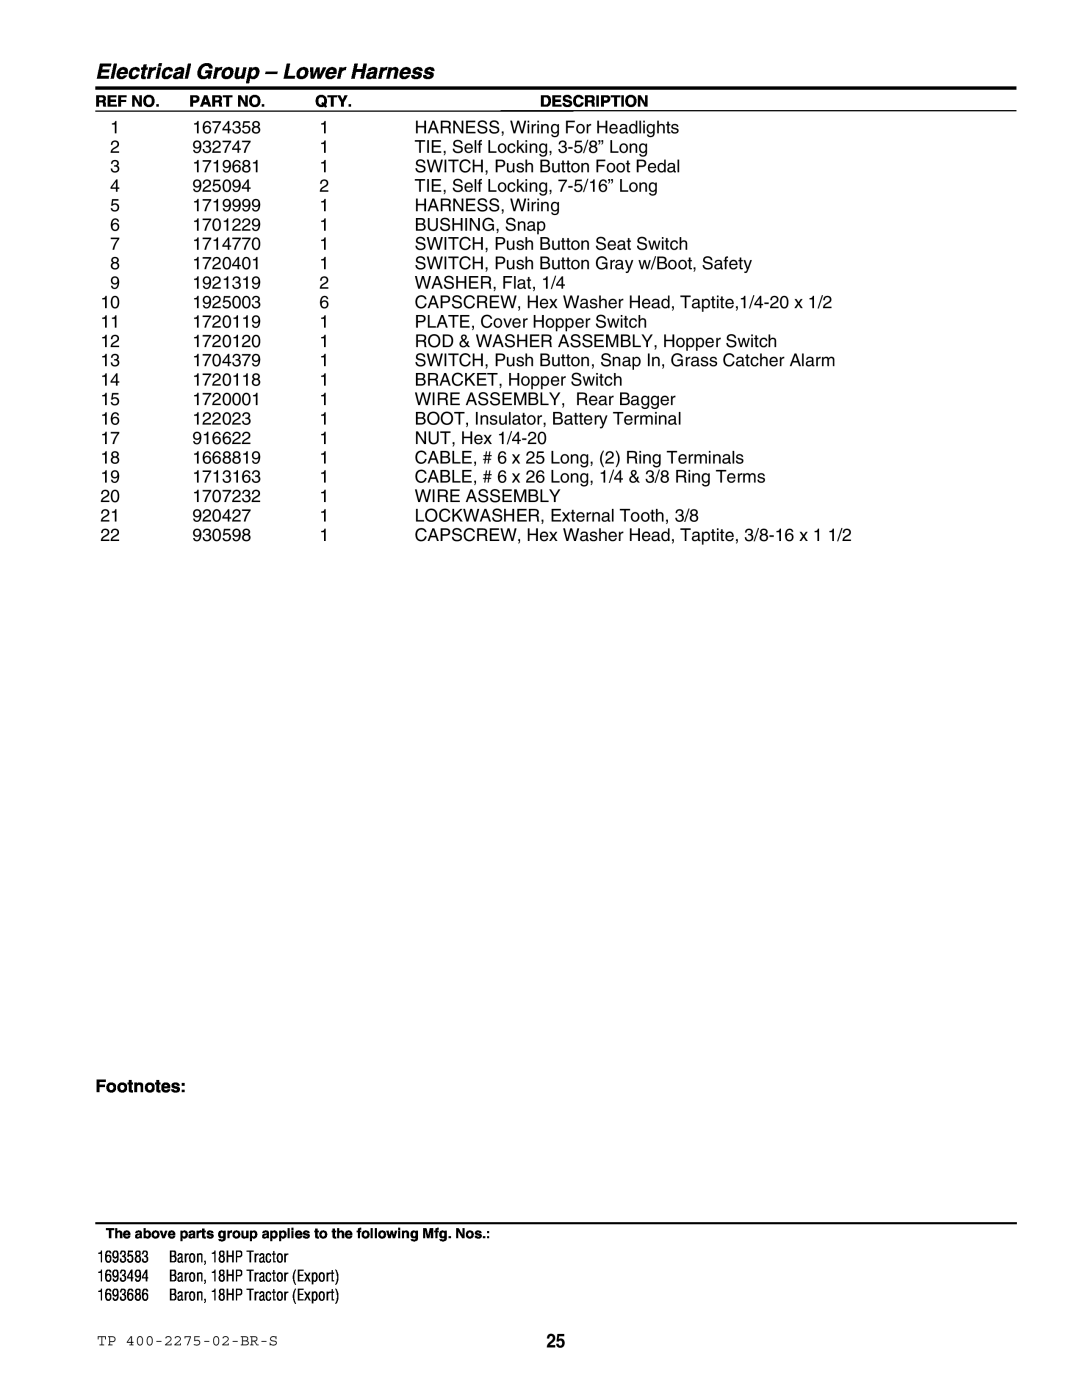 Massey Ferguson L&G 1693583 manual Electrical Group - Lower Harness, Footnotes 